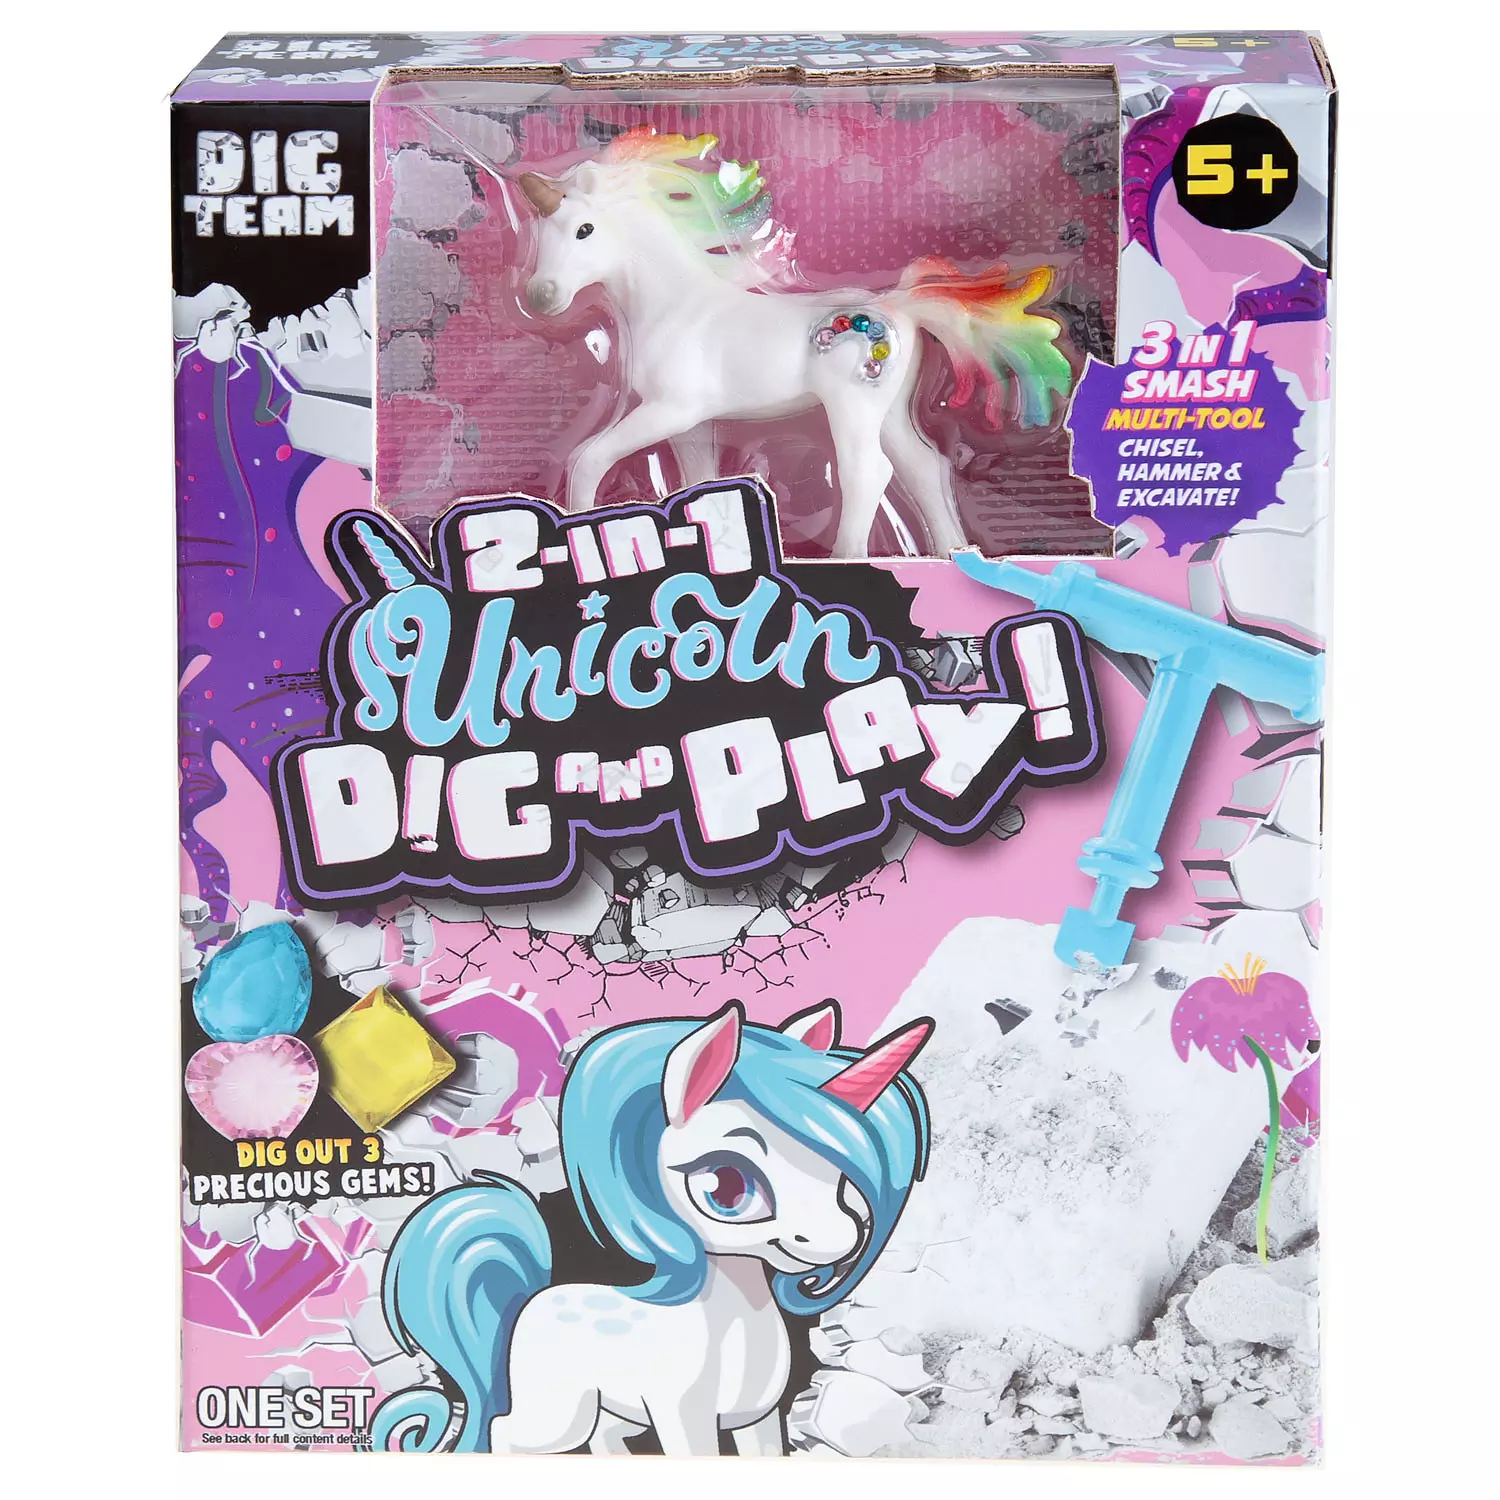 Dig team 2-in-1 unicorn dig and play!